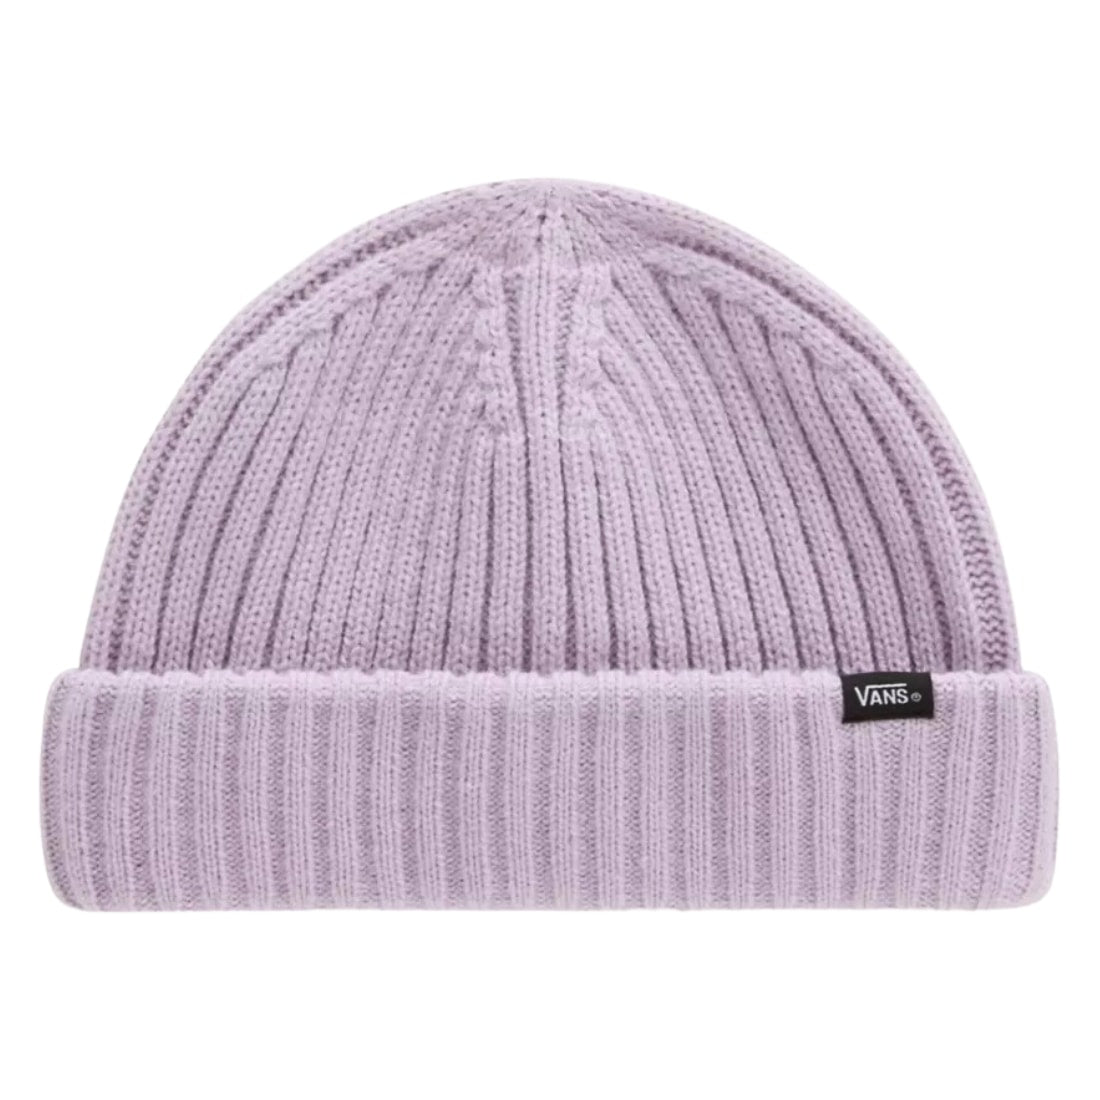 Vans Shallow Beanie - Lavender Frost - Fold Beanie by Vans